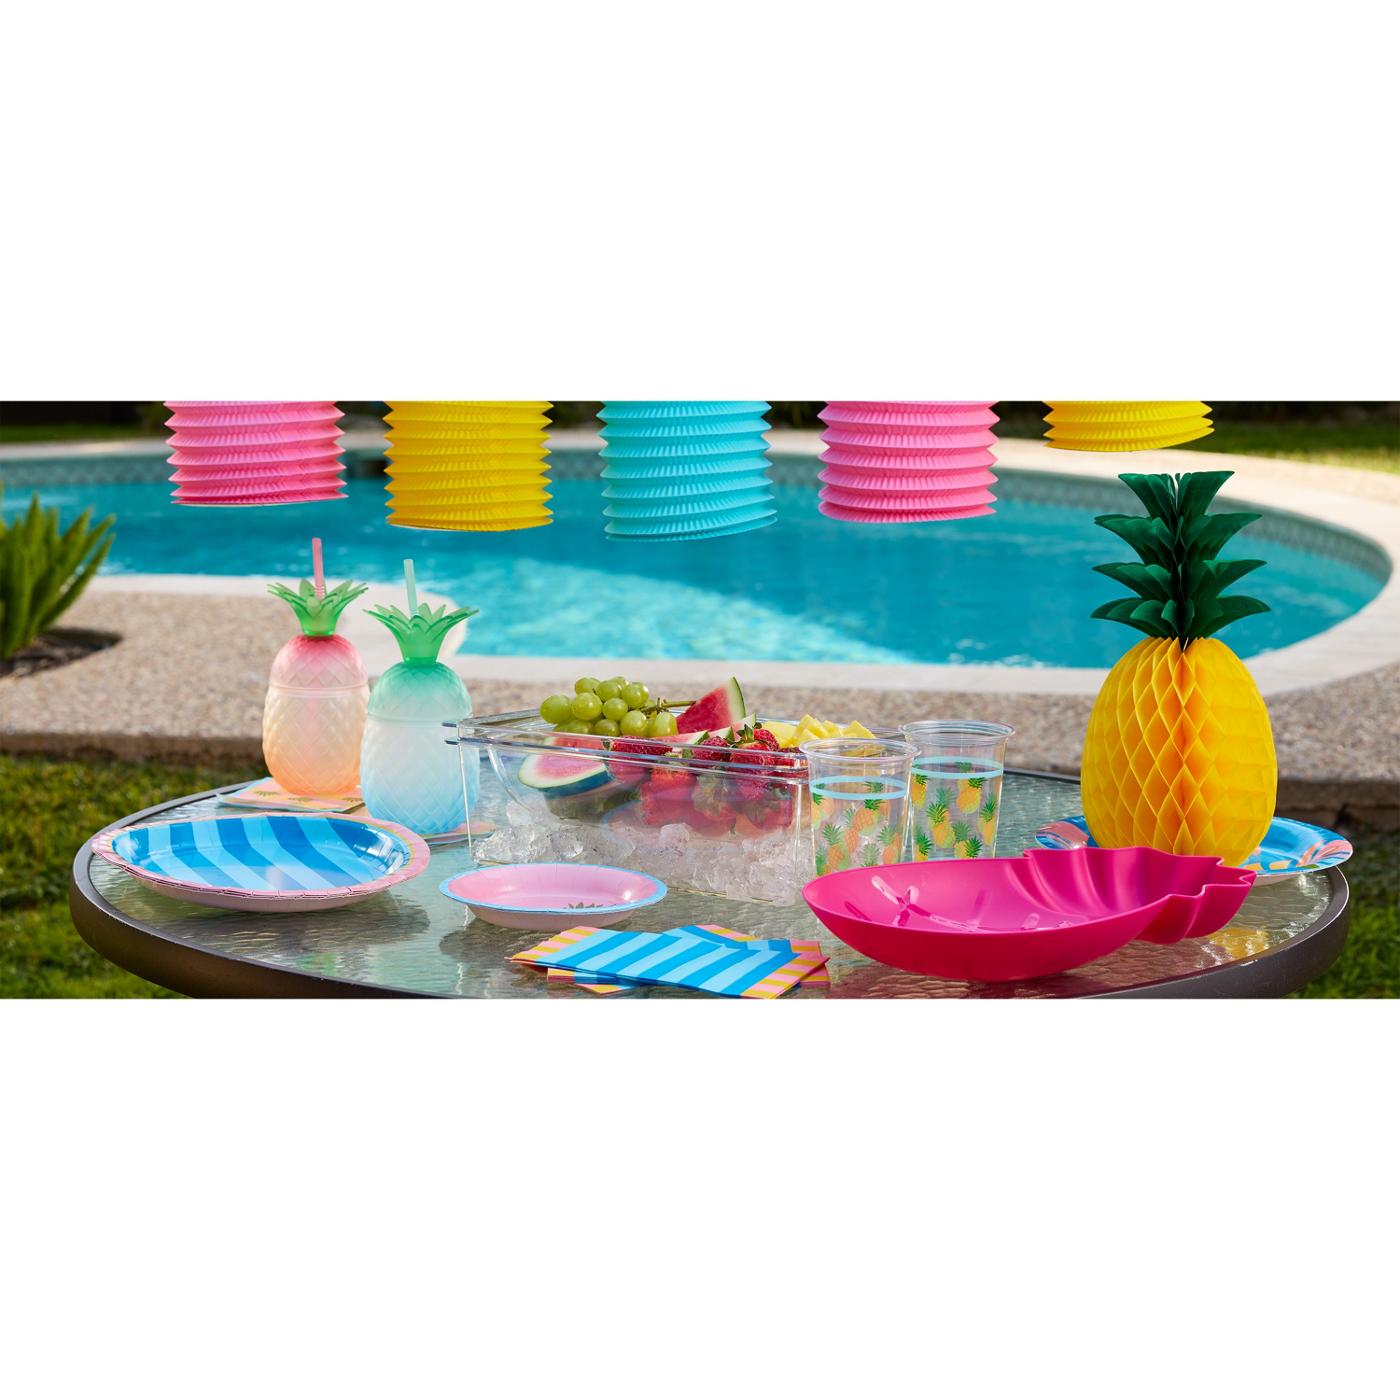 Destination Holiday Pineapple Tray - Pink; image 2 of 2